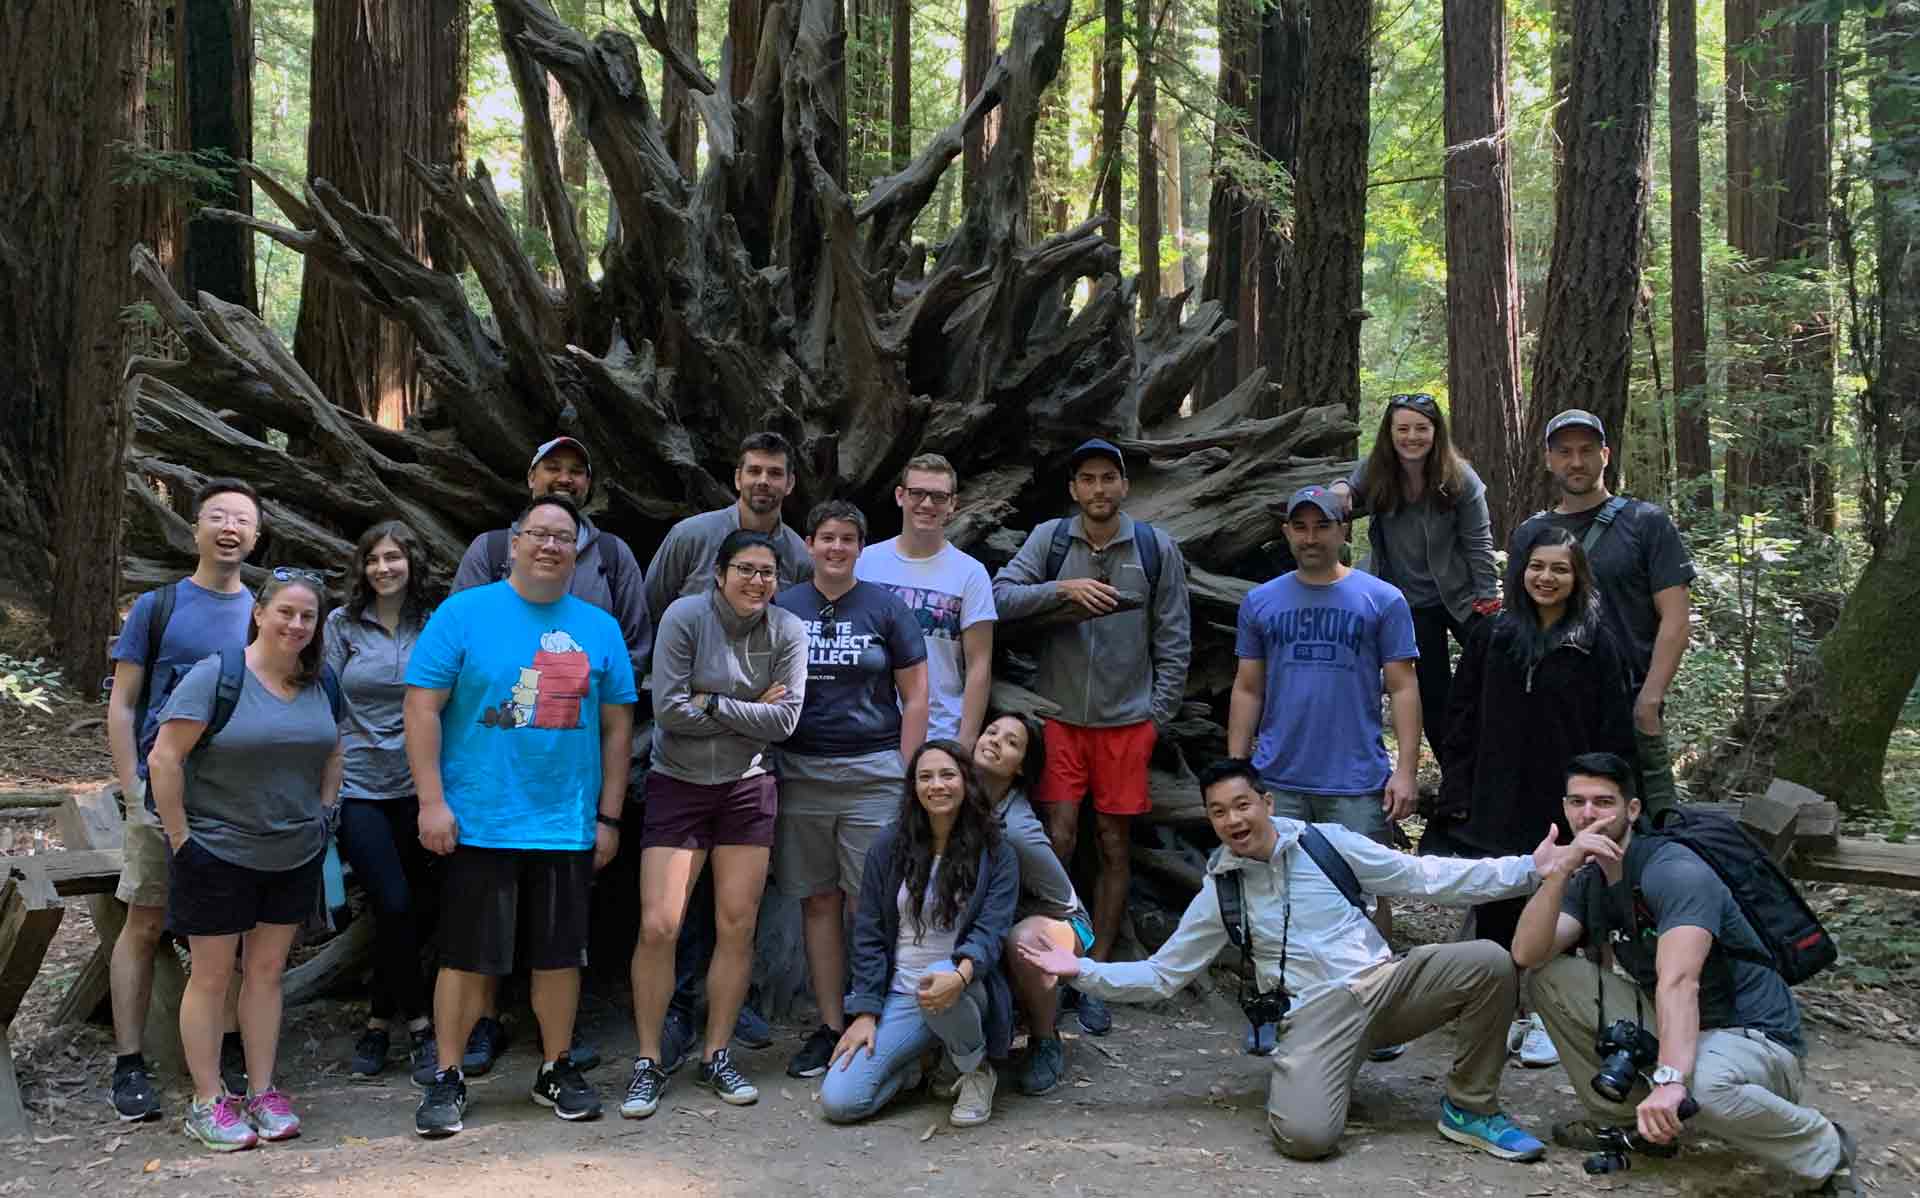 Part of the FormAssembly team poses for a photo at the FormAssembly 2019 reunion in the redwood forest near Sonoma, California.